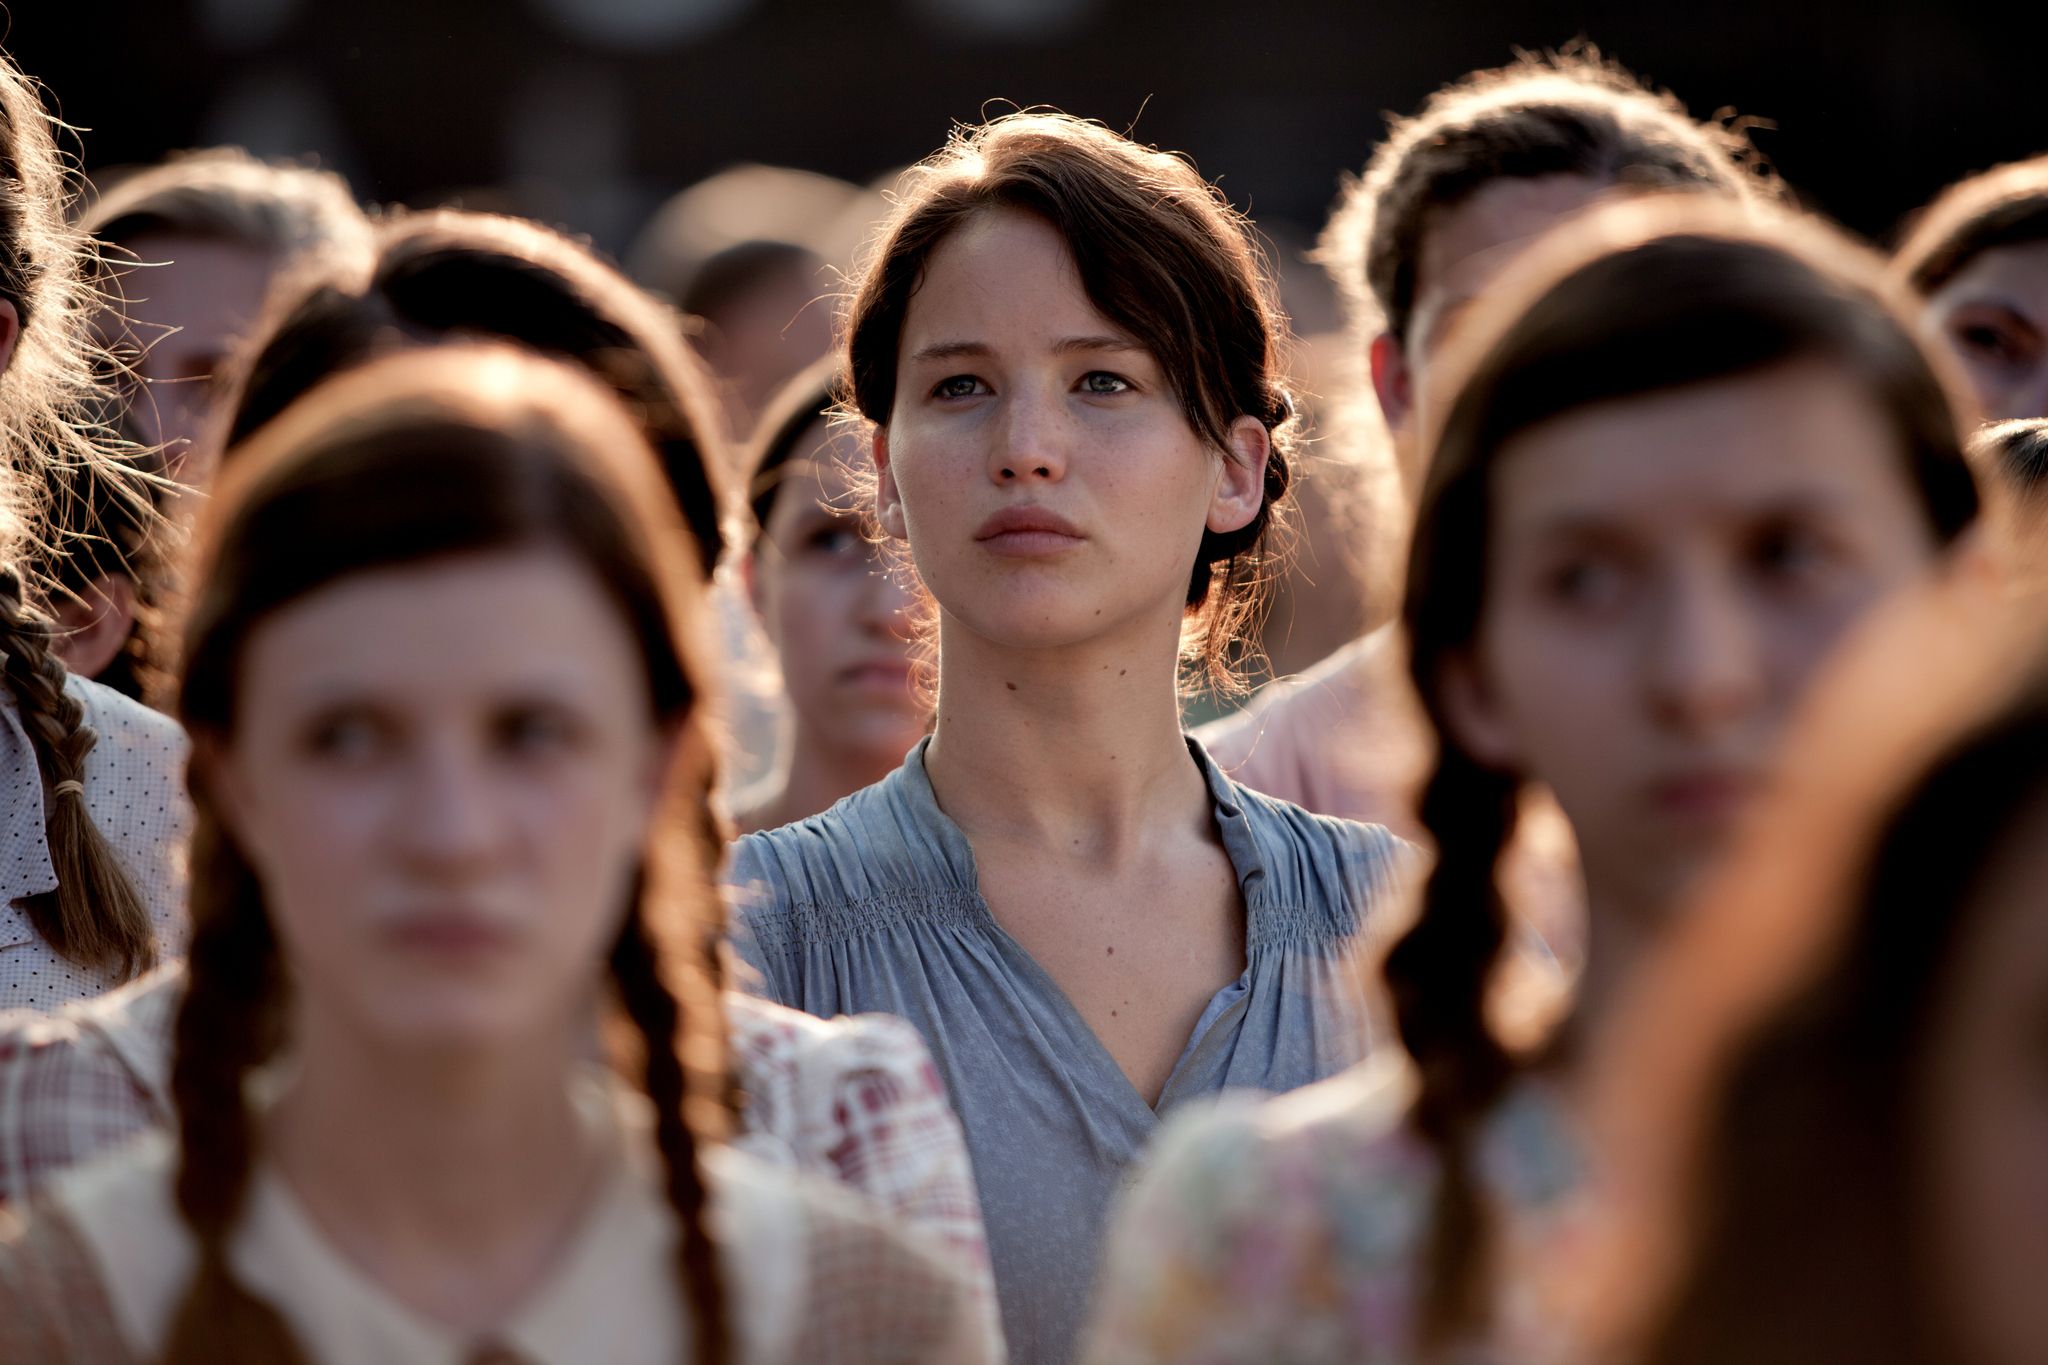 The Hunger Games In Order: How to Watch the Movies Chronologically